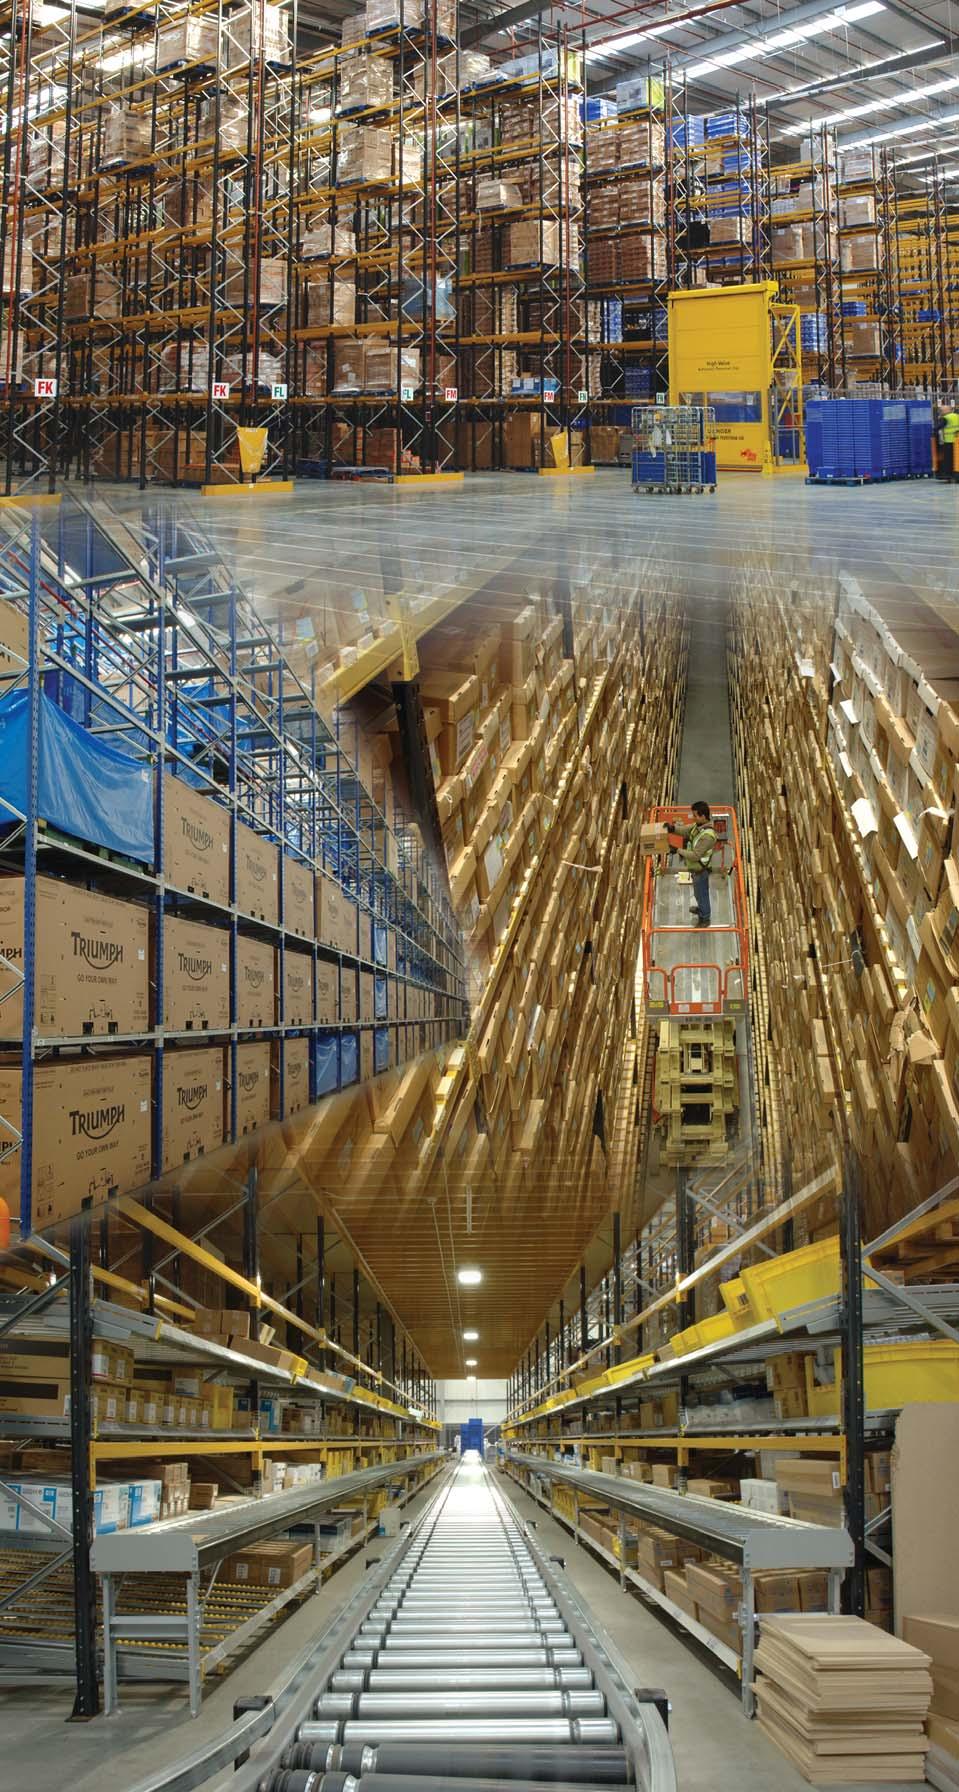 pallet racking and storage solutions Founded in 1951, Link 51 has evolved to become a leading UK-based manufacturer of racking & storage systems, with a reputation for quality products and service